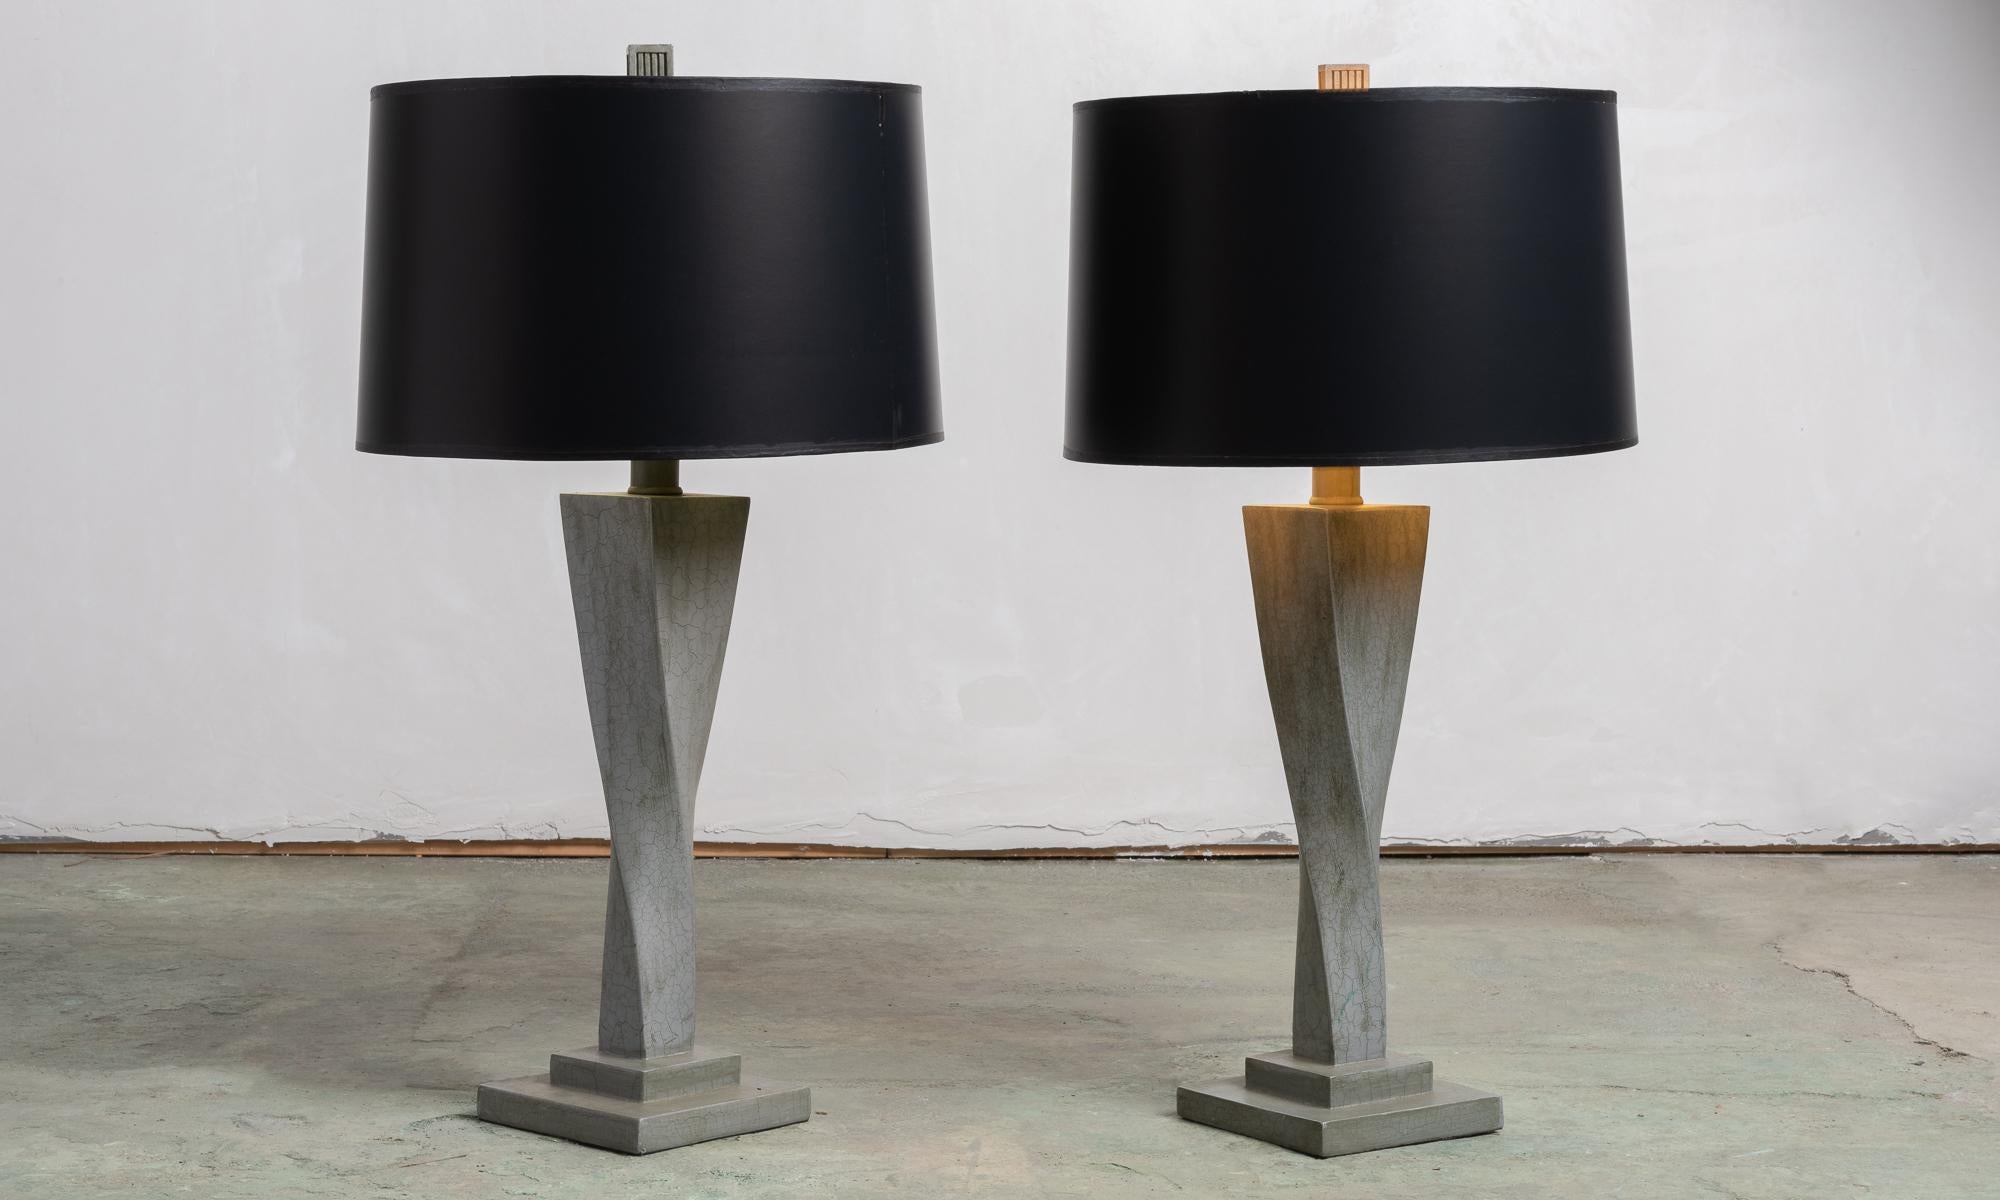 Pair of twisted grey ceramic table lamps, America, circa 1950.

Geometric twisting forms feature black shades with gilded interiors.